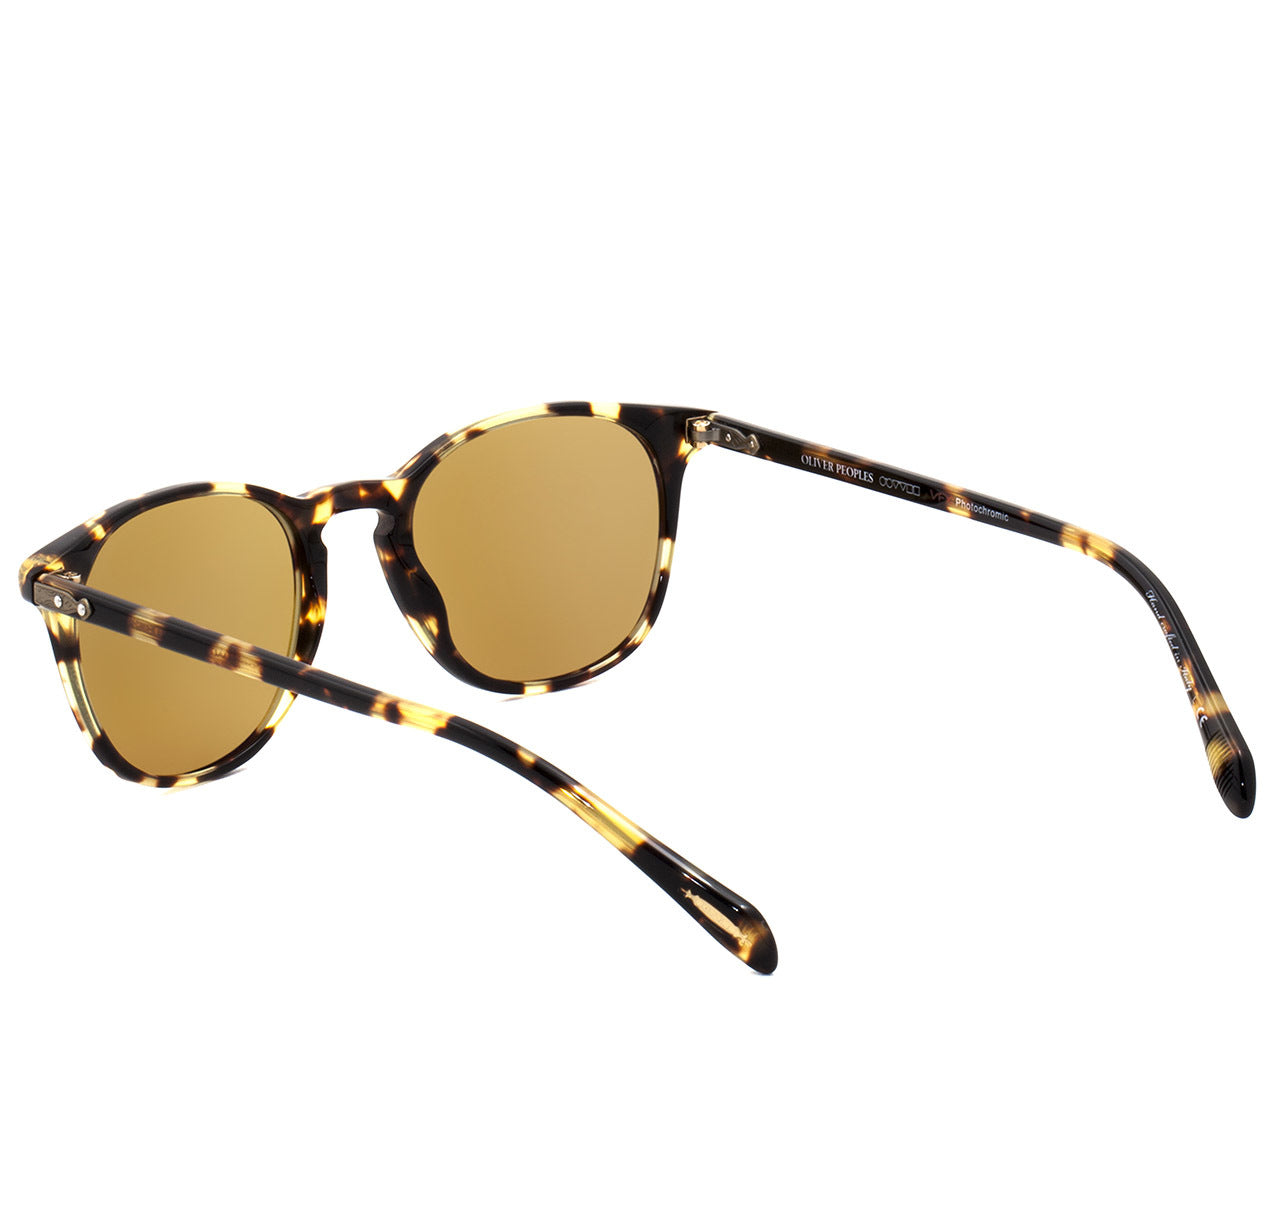 Oliver Peoples Sir Finley Vintage Dark Tortoise Brown with Champagne Photochromic Glass